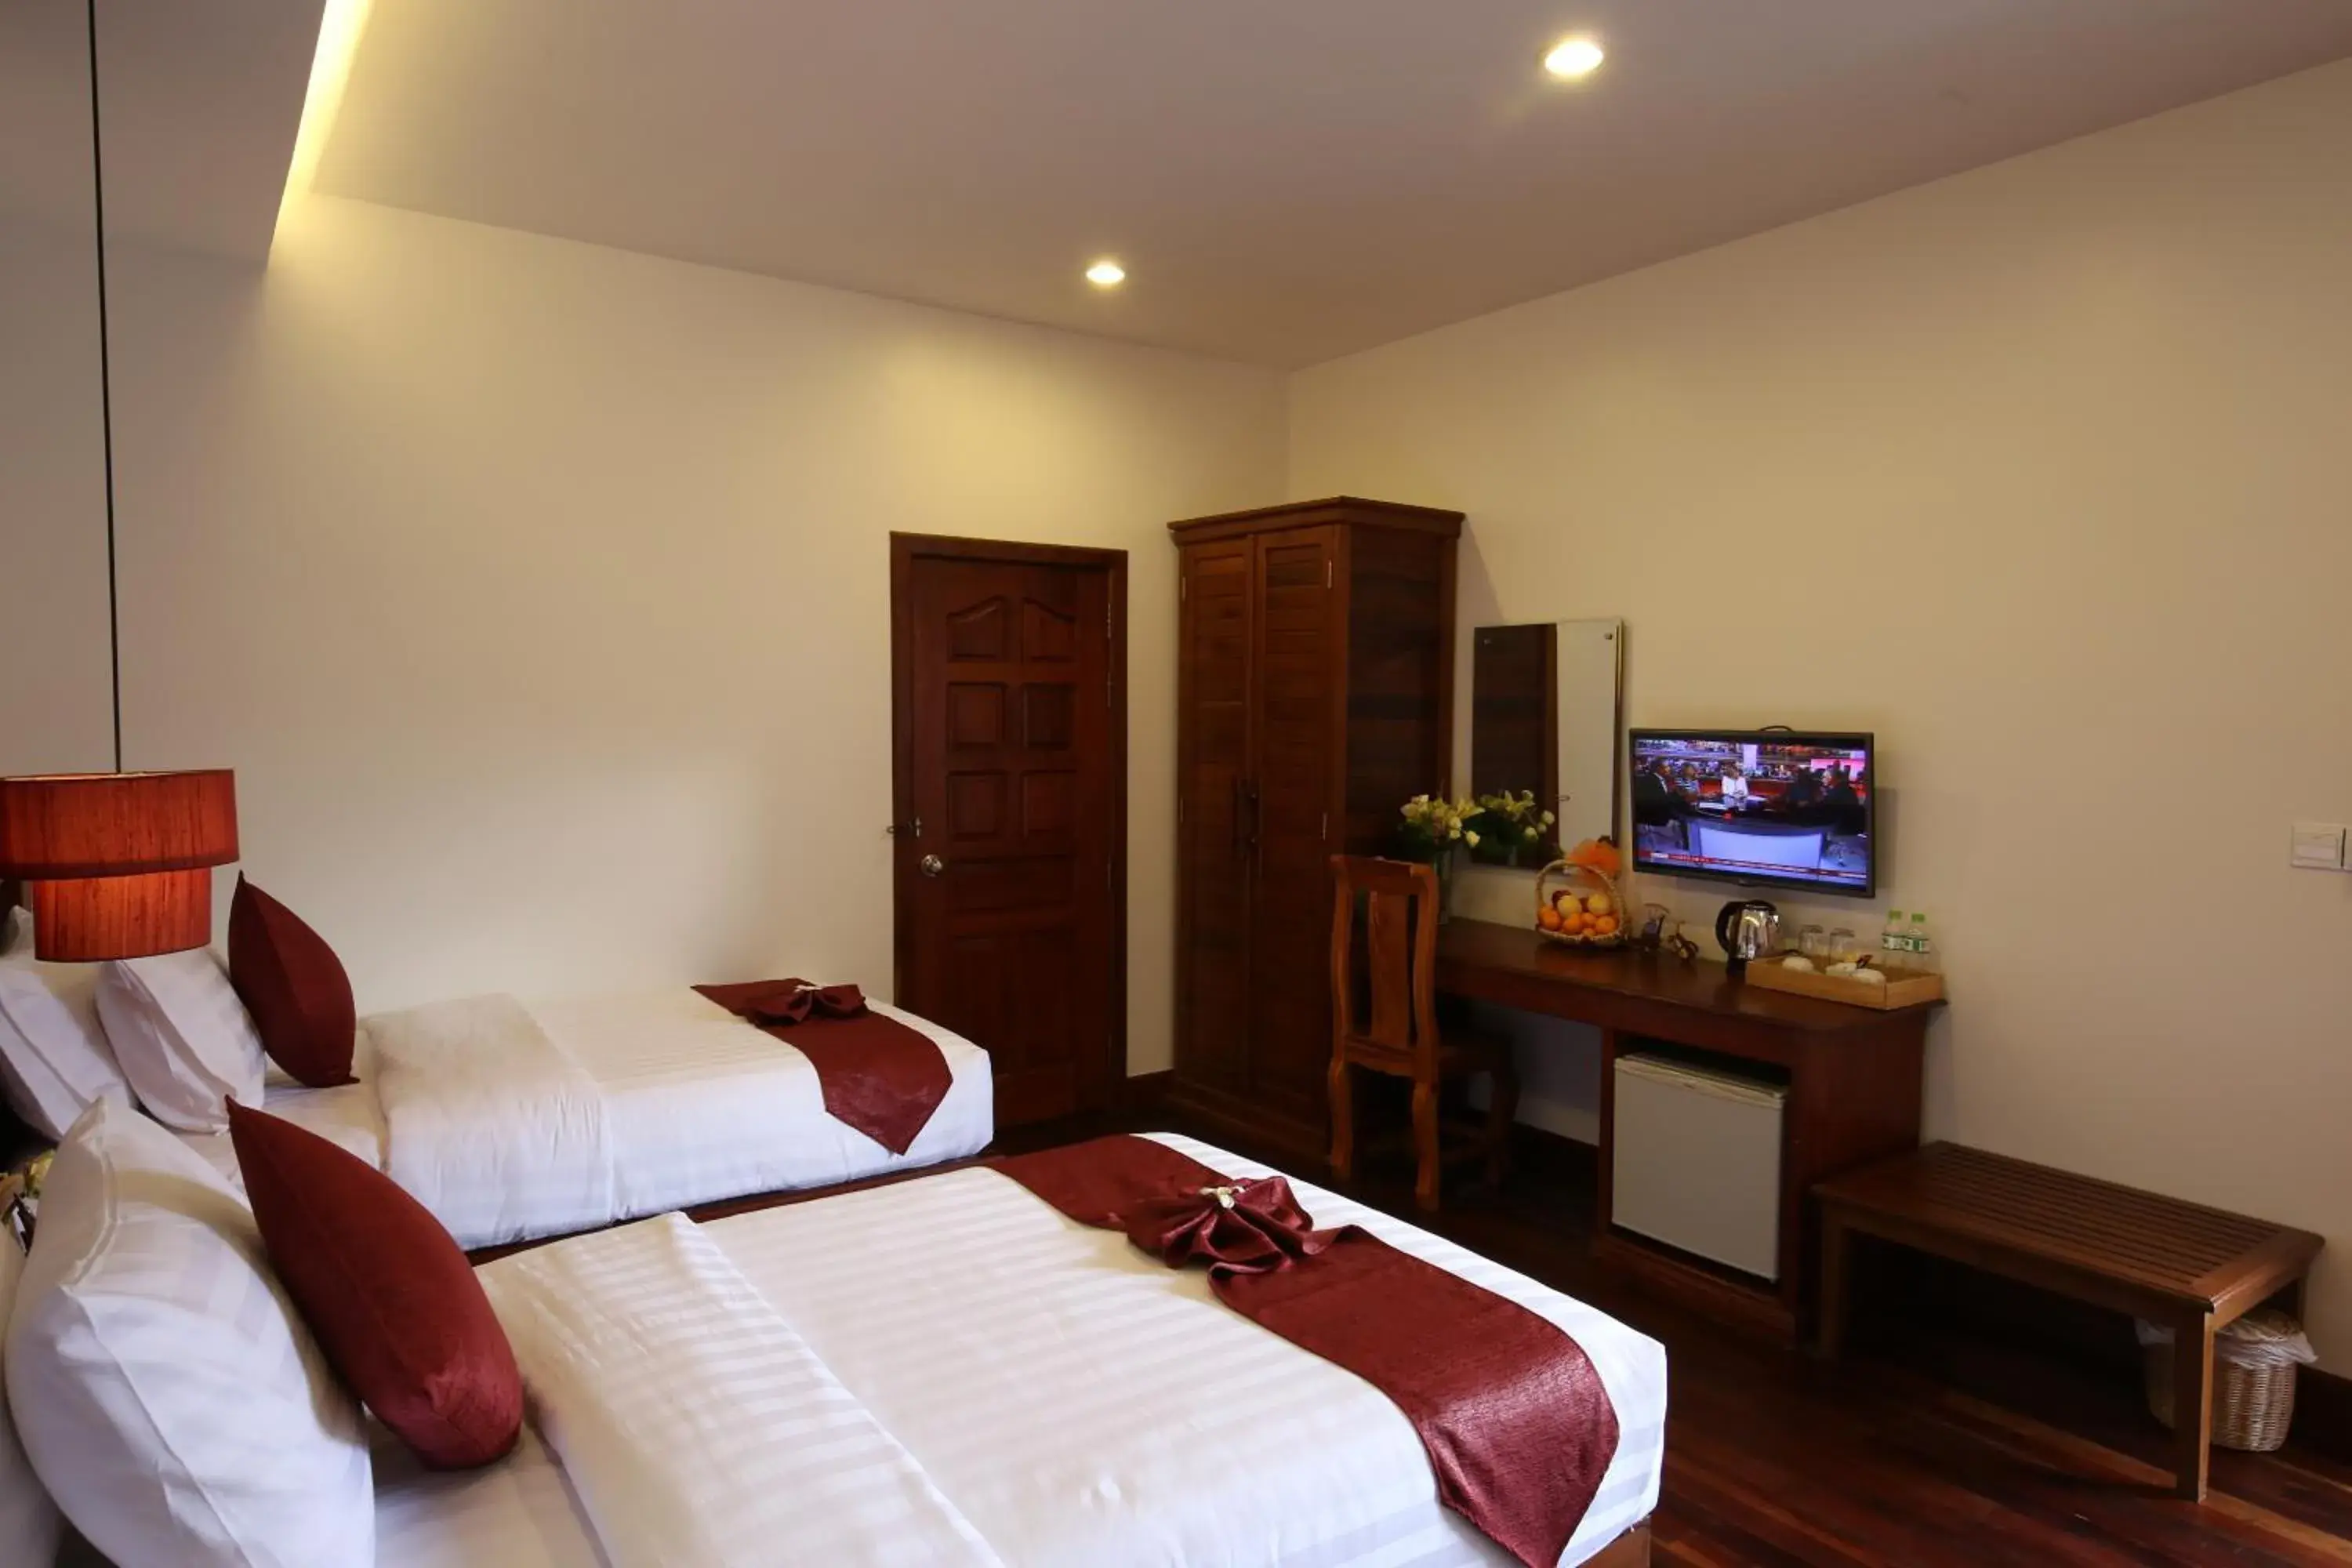 Bed, Room Photo in Holy Angkor Hotel